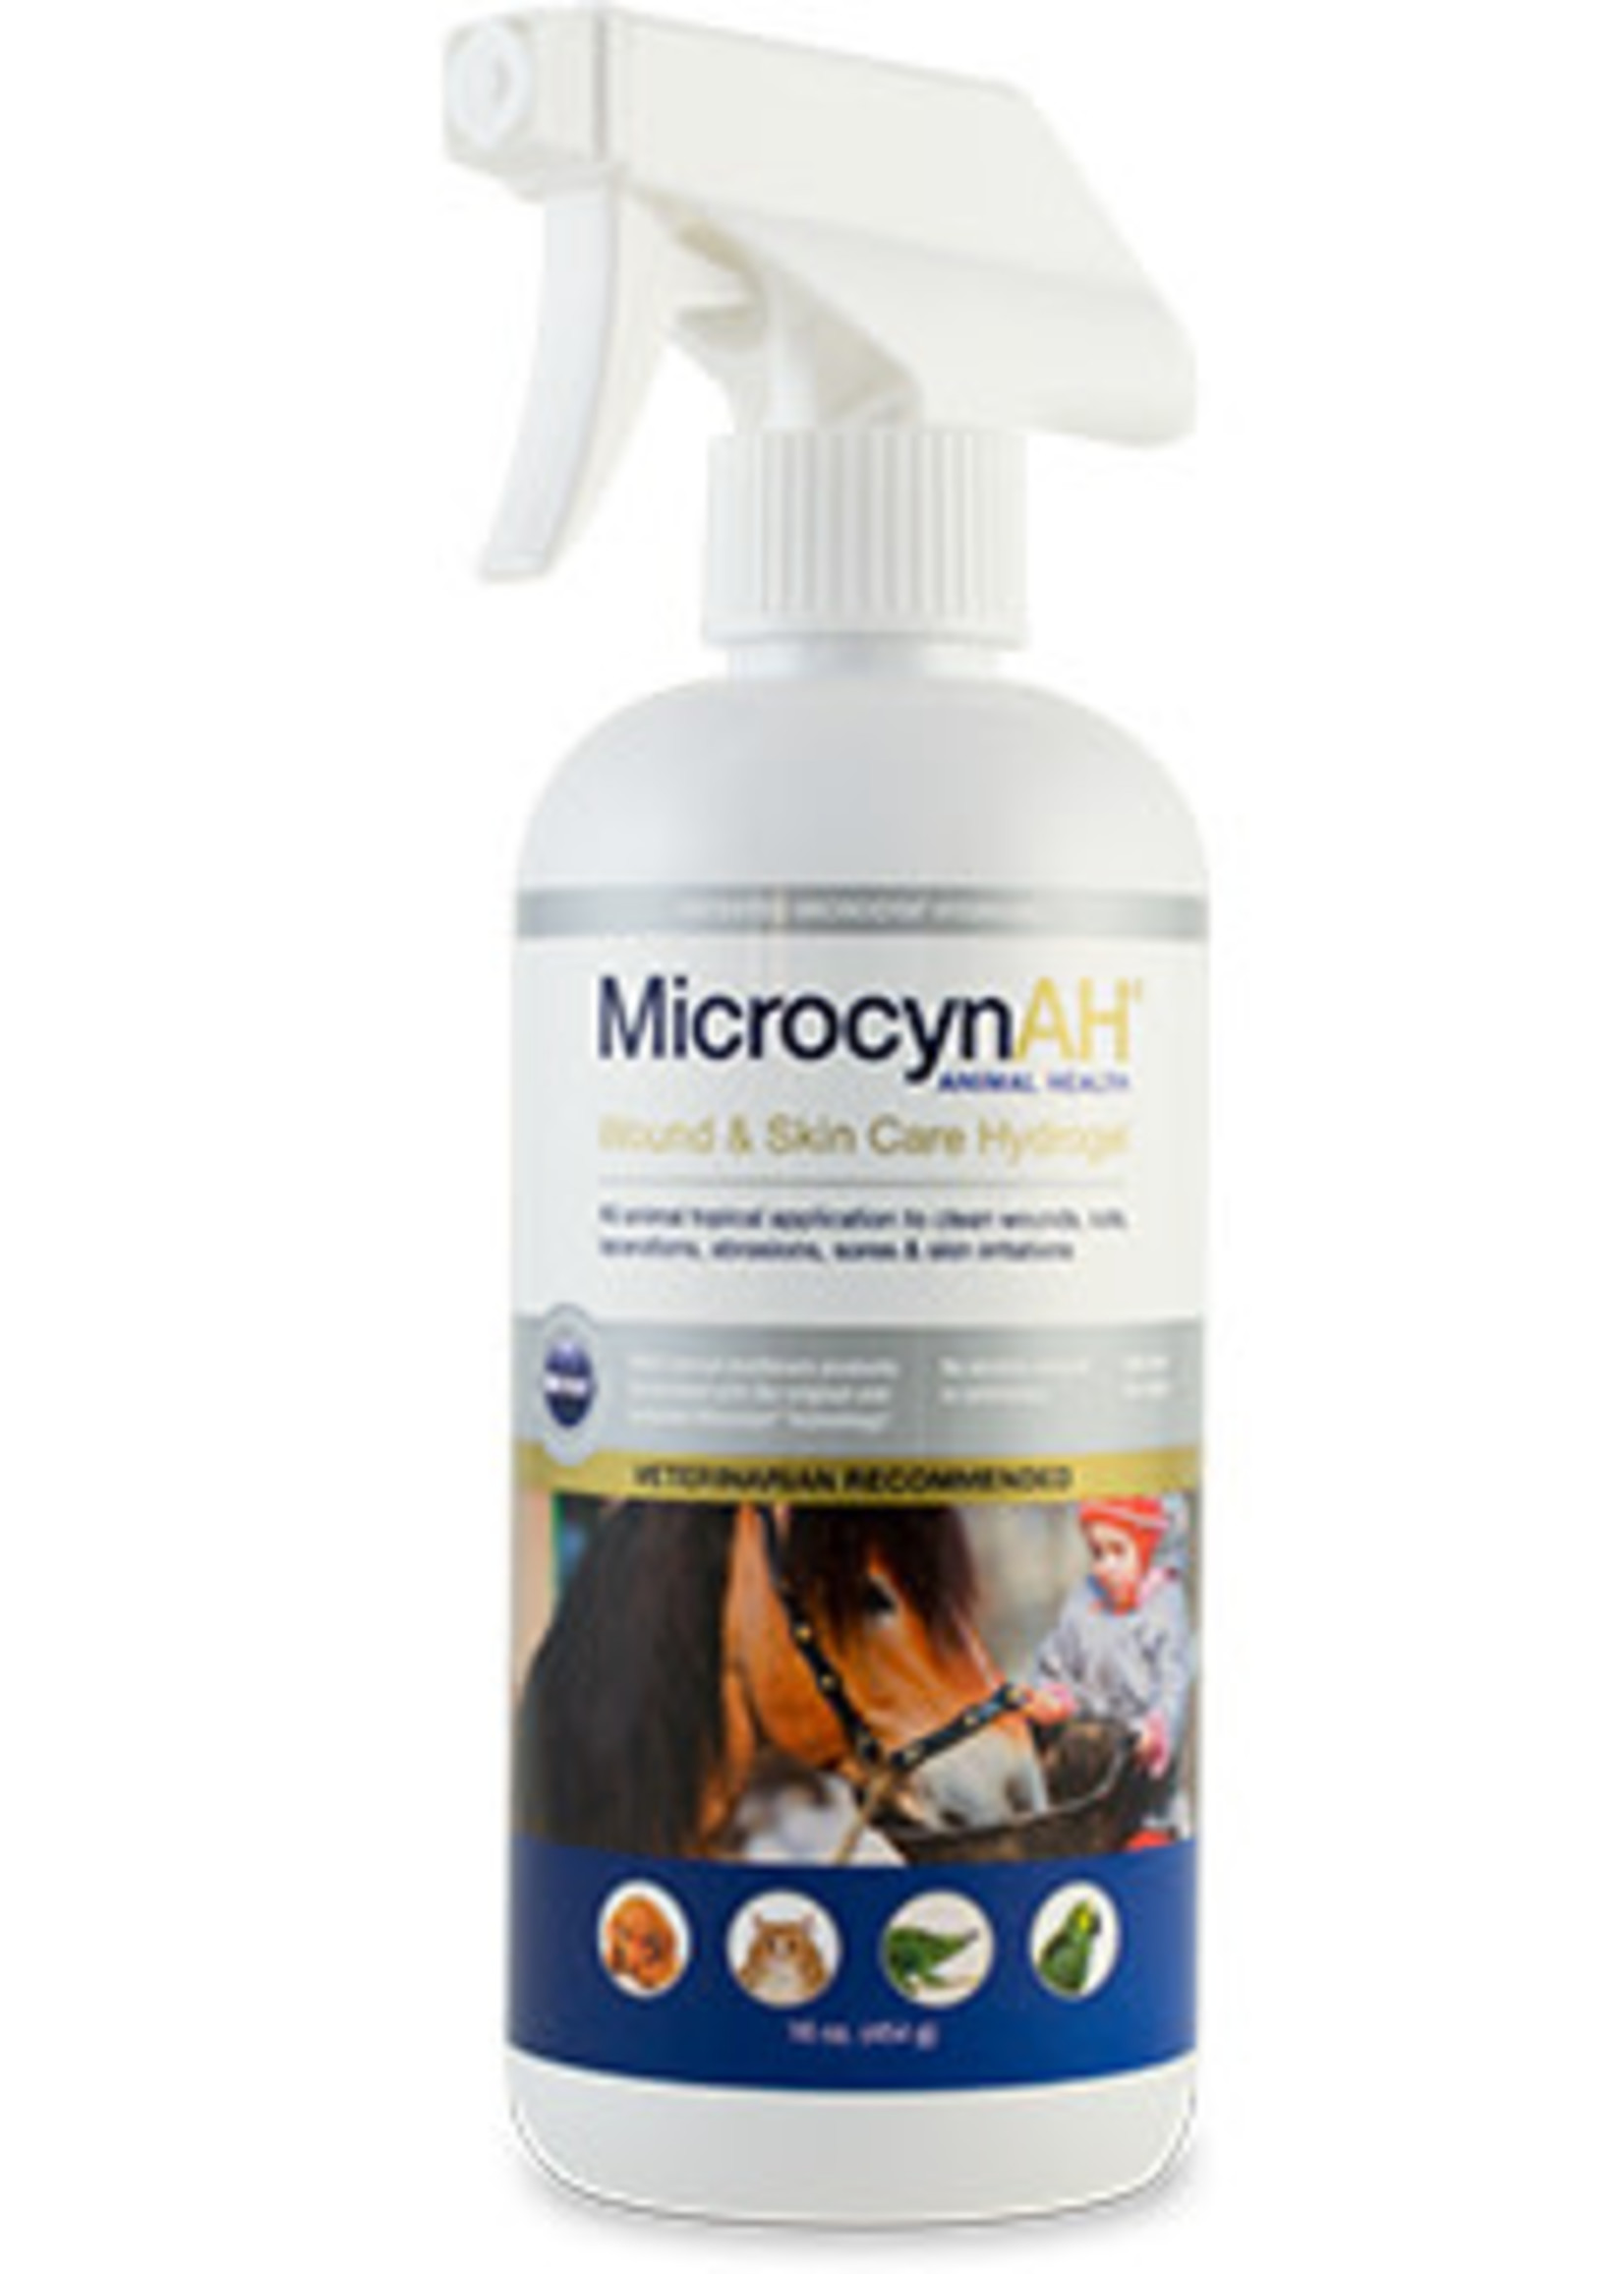 MicrocynAH MicrocynAH Cat/Dog Wound and Skin Care Hydrogel